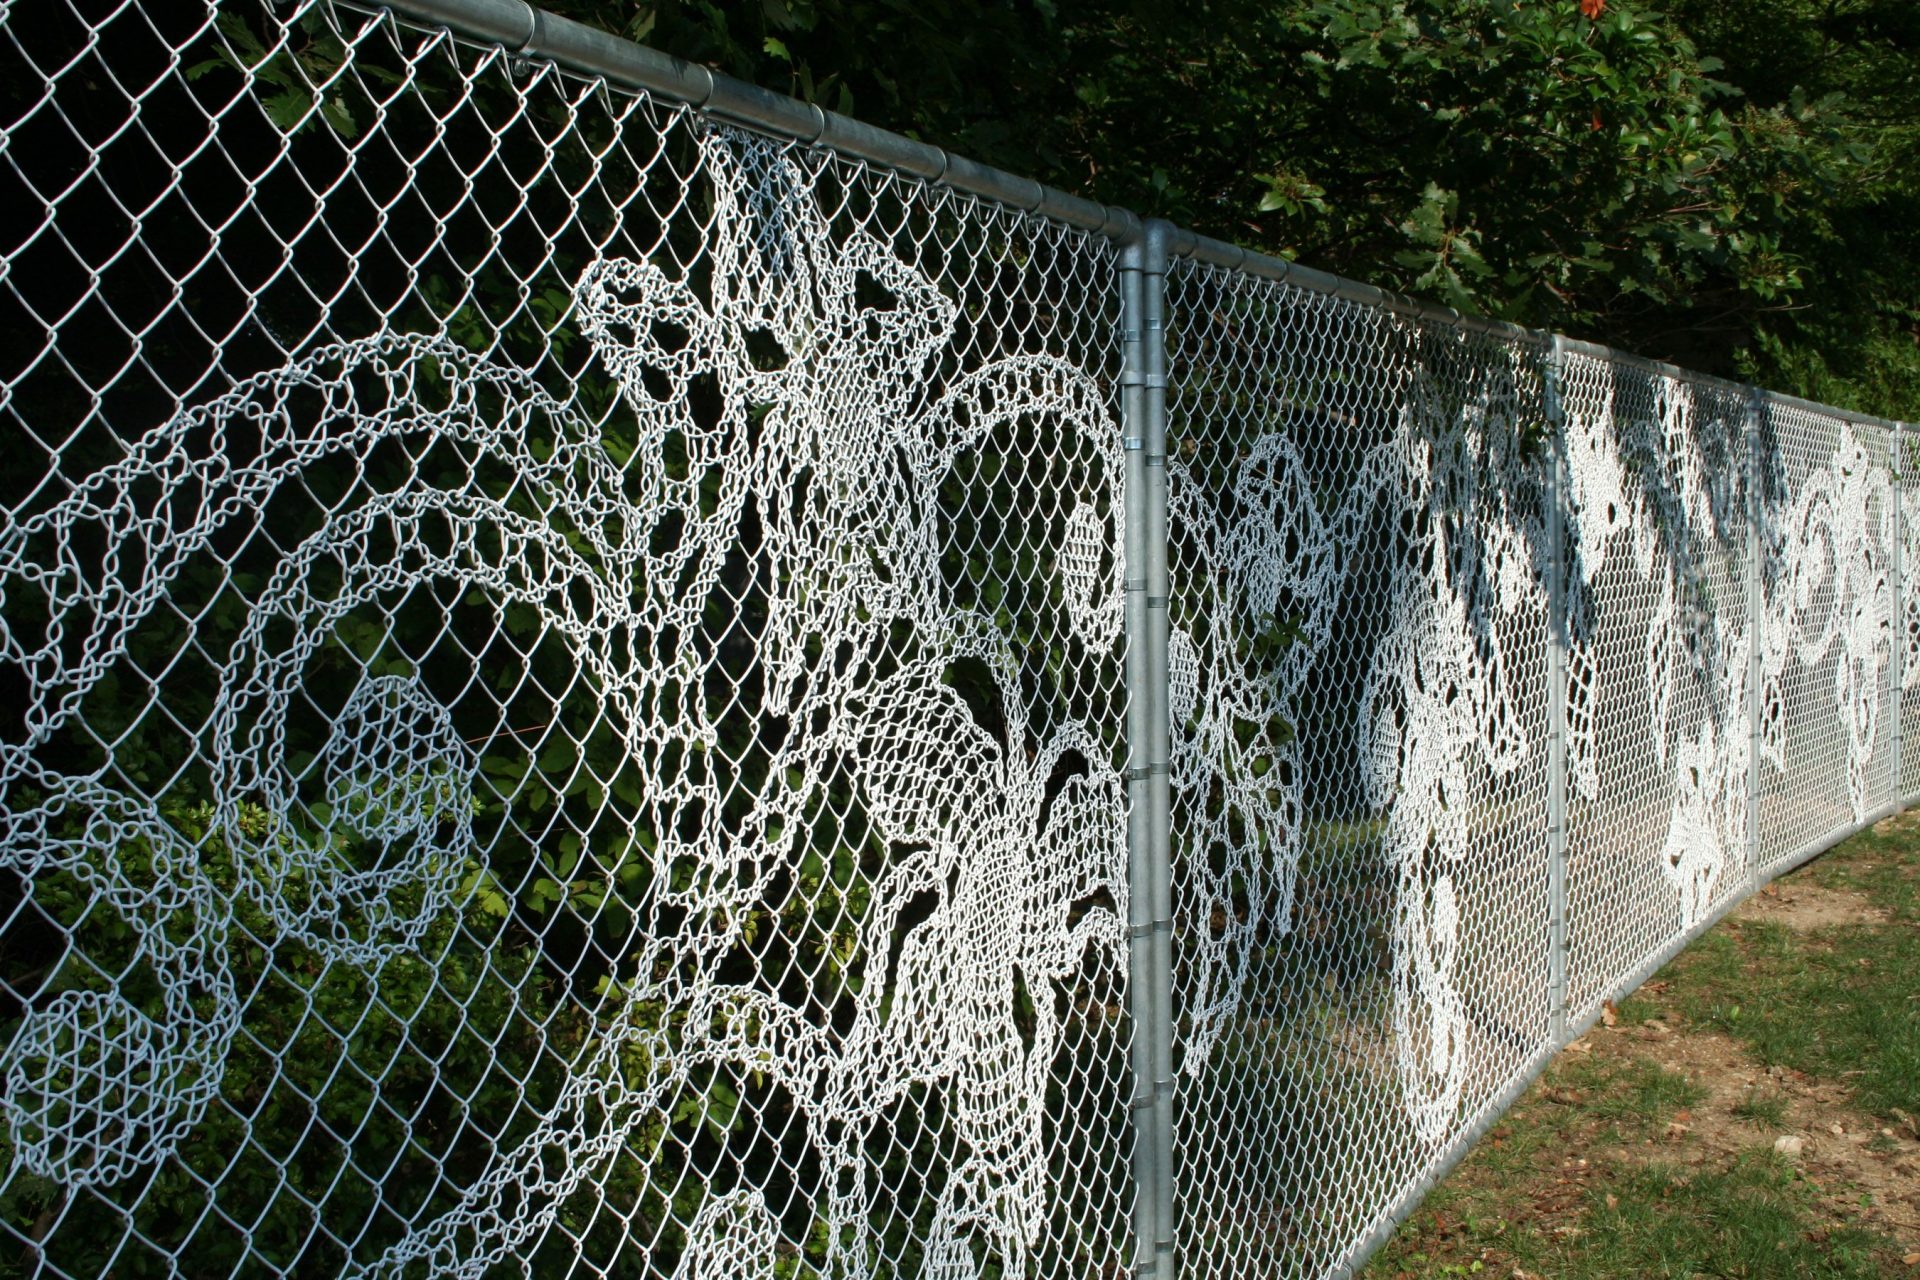 decorative fence, privacy fence, lowes fence panels, lowes privacy fence, decorative fencing, decorative wood fence, decorative privacy fence, ornamental fence for sale, white ornamental fence, decorative aluminum fence, decorative outdoor fencing, ornate fencing, 3 foot decorative fence, ornate fence panels, yard fencing, fencing solutions, pool privacy fence, fence solutions, privacy fence solutions, decorative yard fencing, decorative vinyl fence, active yard vinyl fence, decorative vinyl 